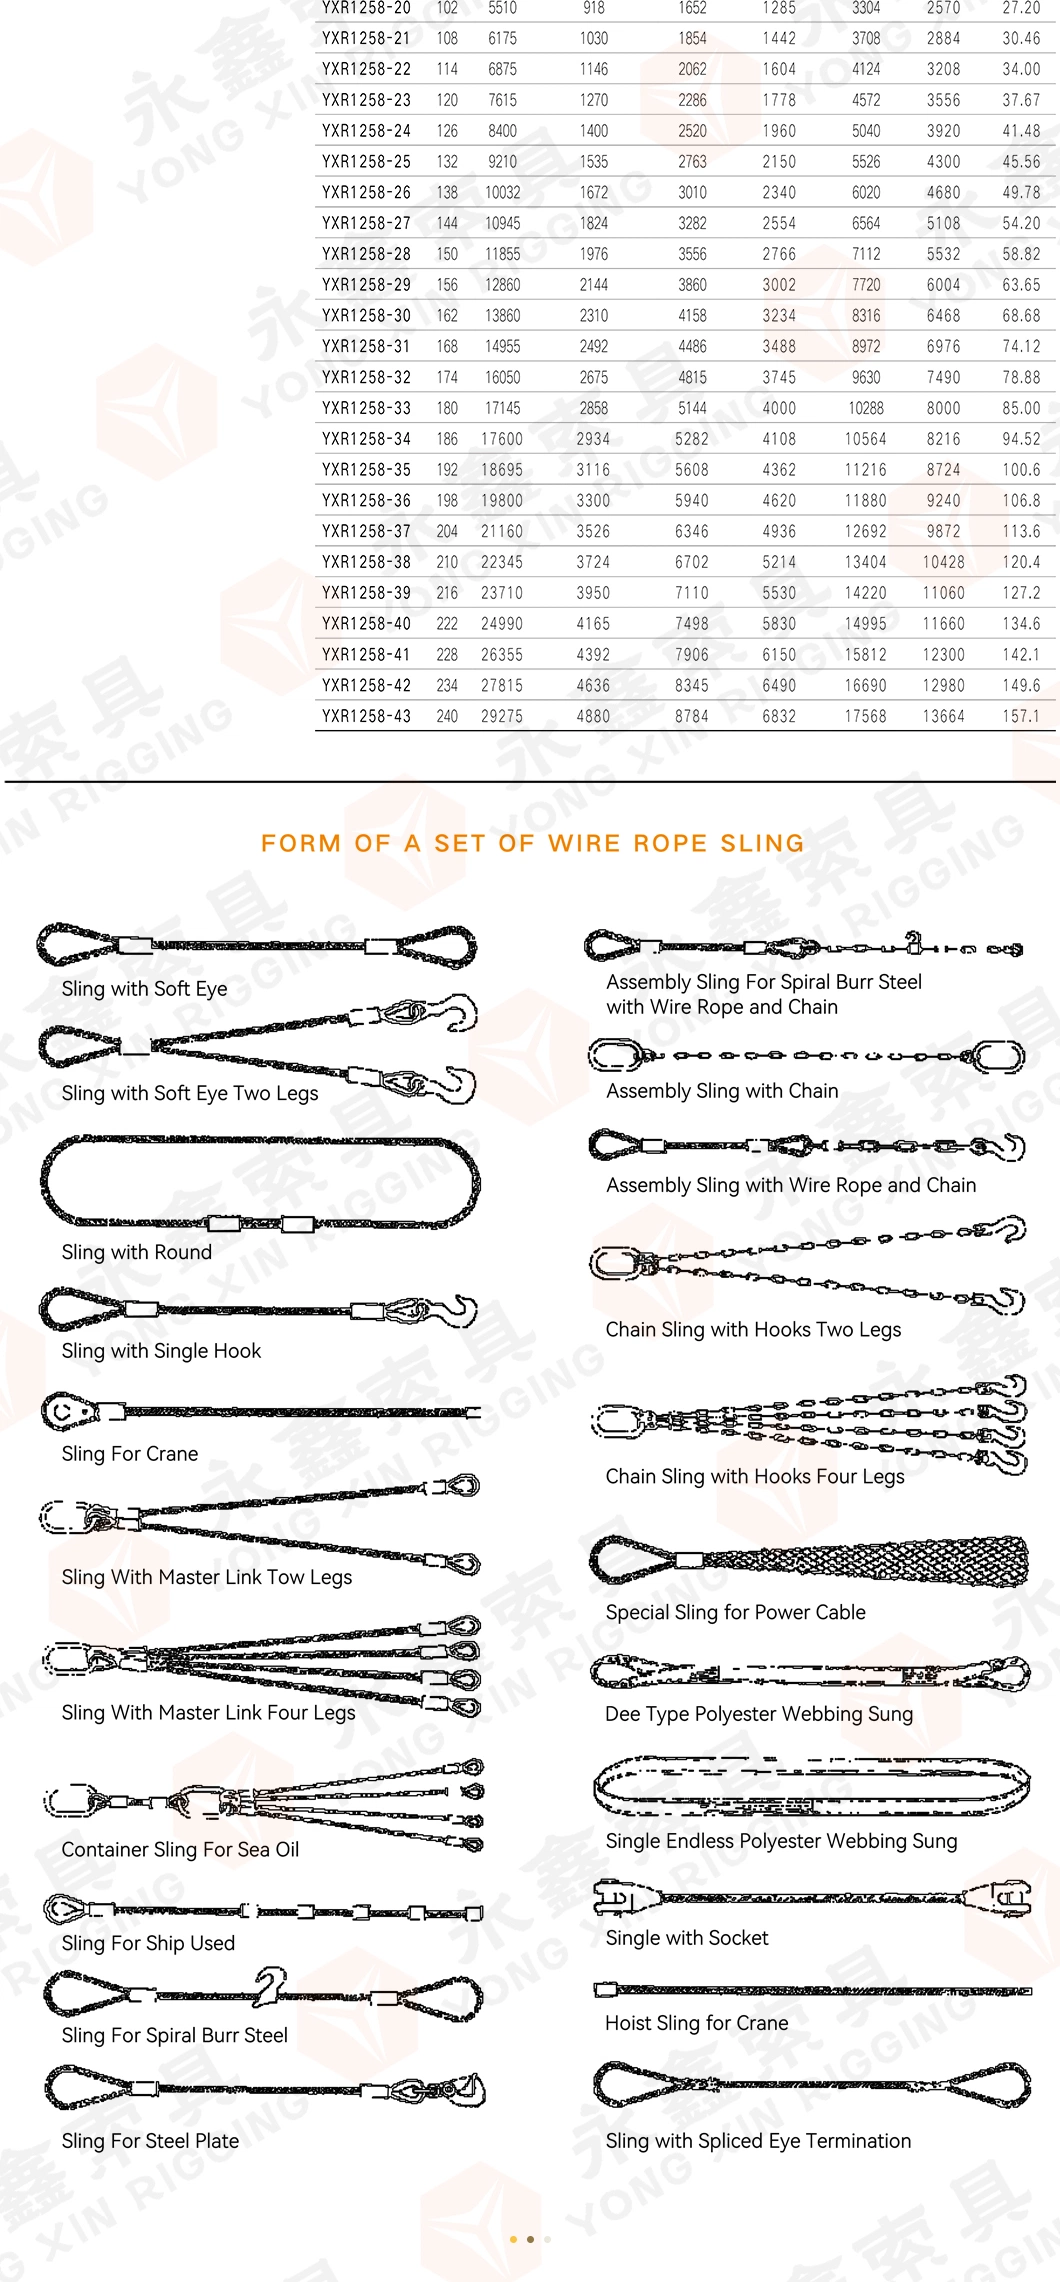 Custom Traction Galvanized Steel Wire Rope, Plastic Coated PVC Cable Stainless Steel Sports Equipment Wire for Lifting